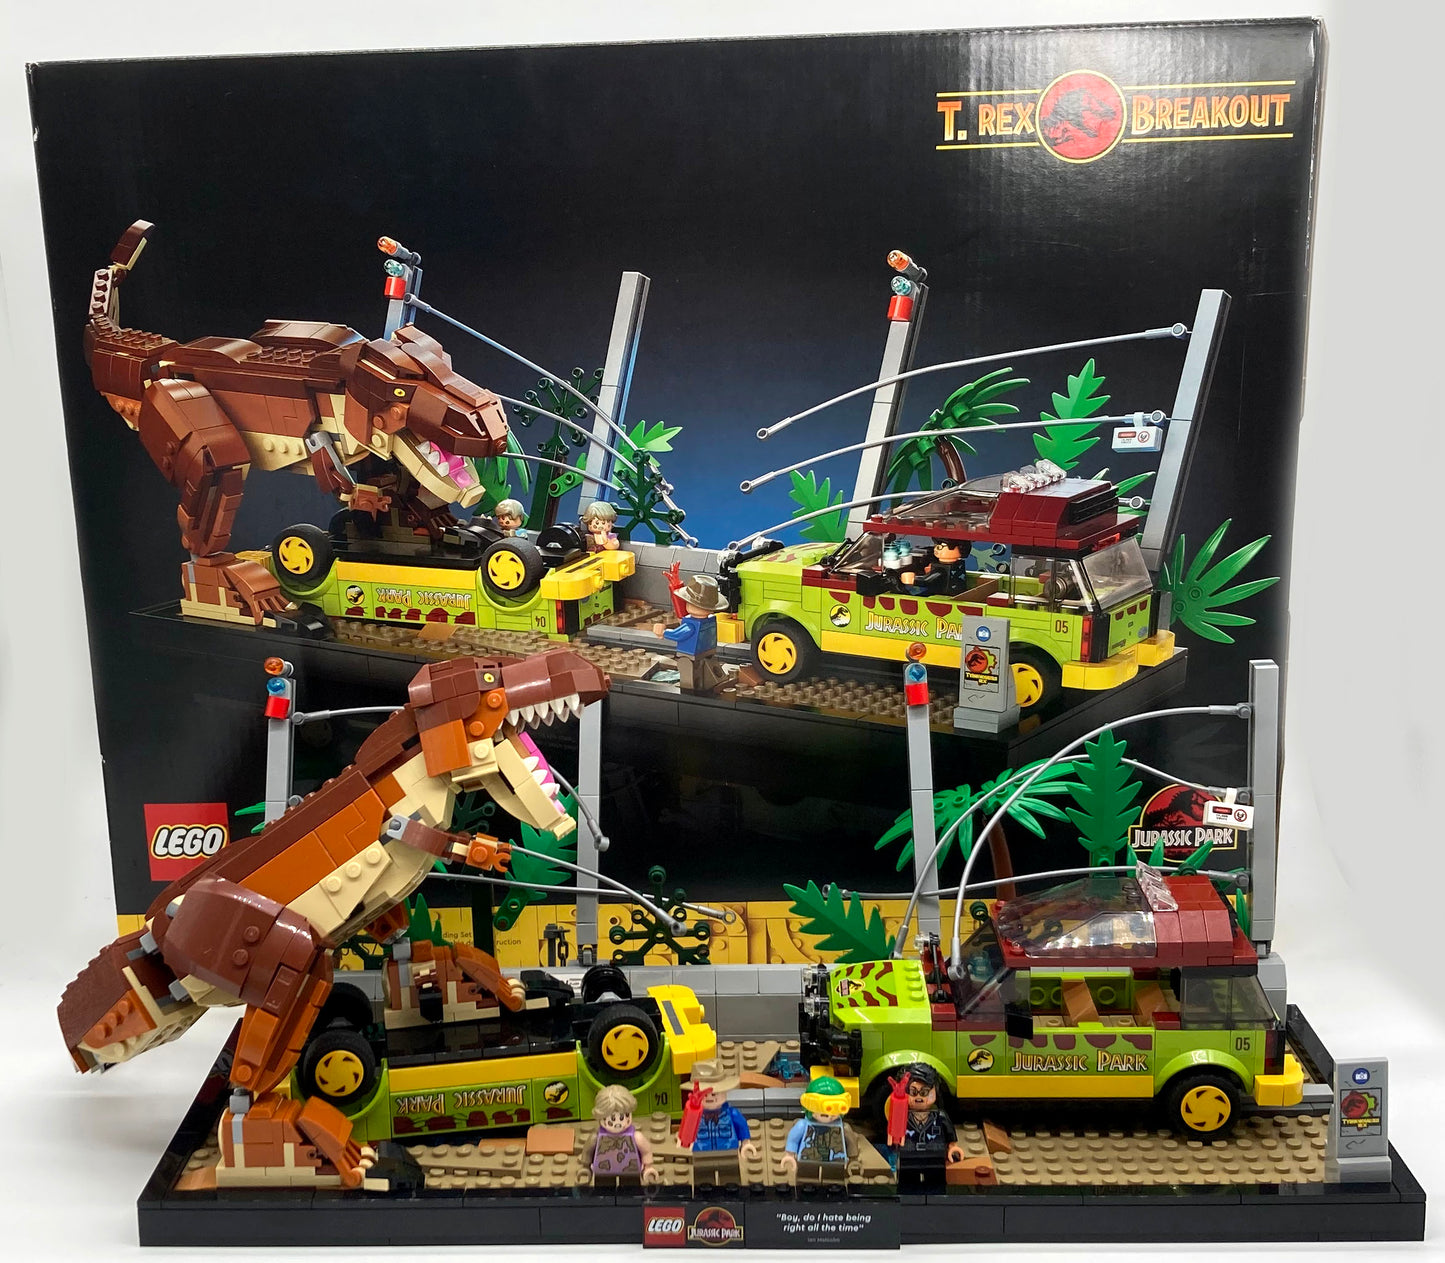 Used Set 76956 T.rex Breakout (No Instruction Manual, with Box)